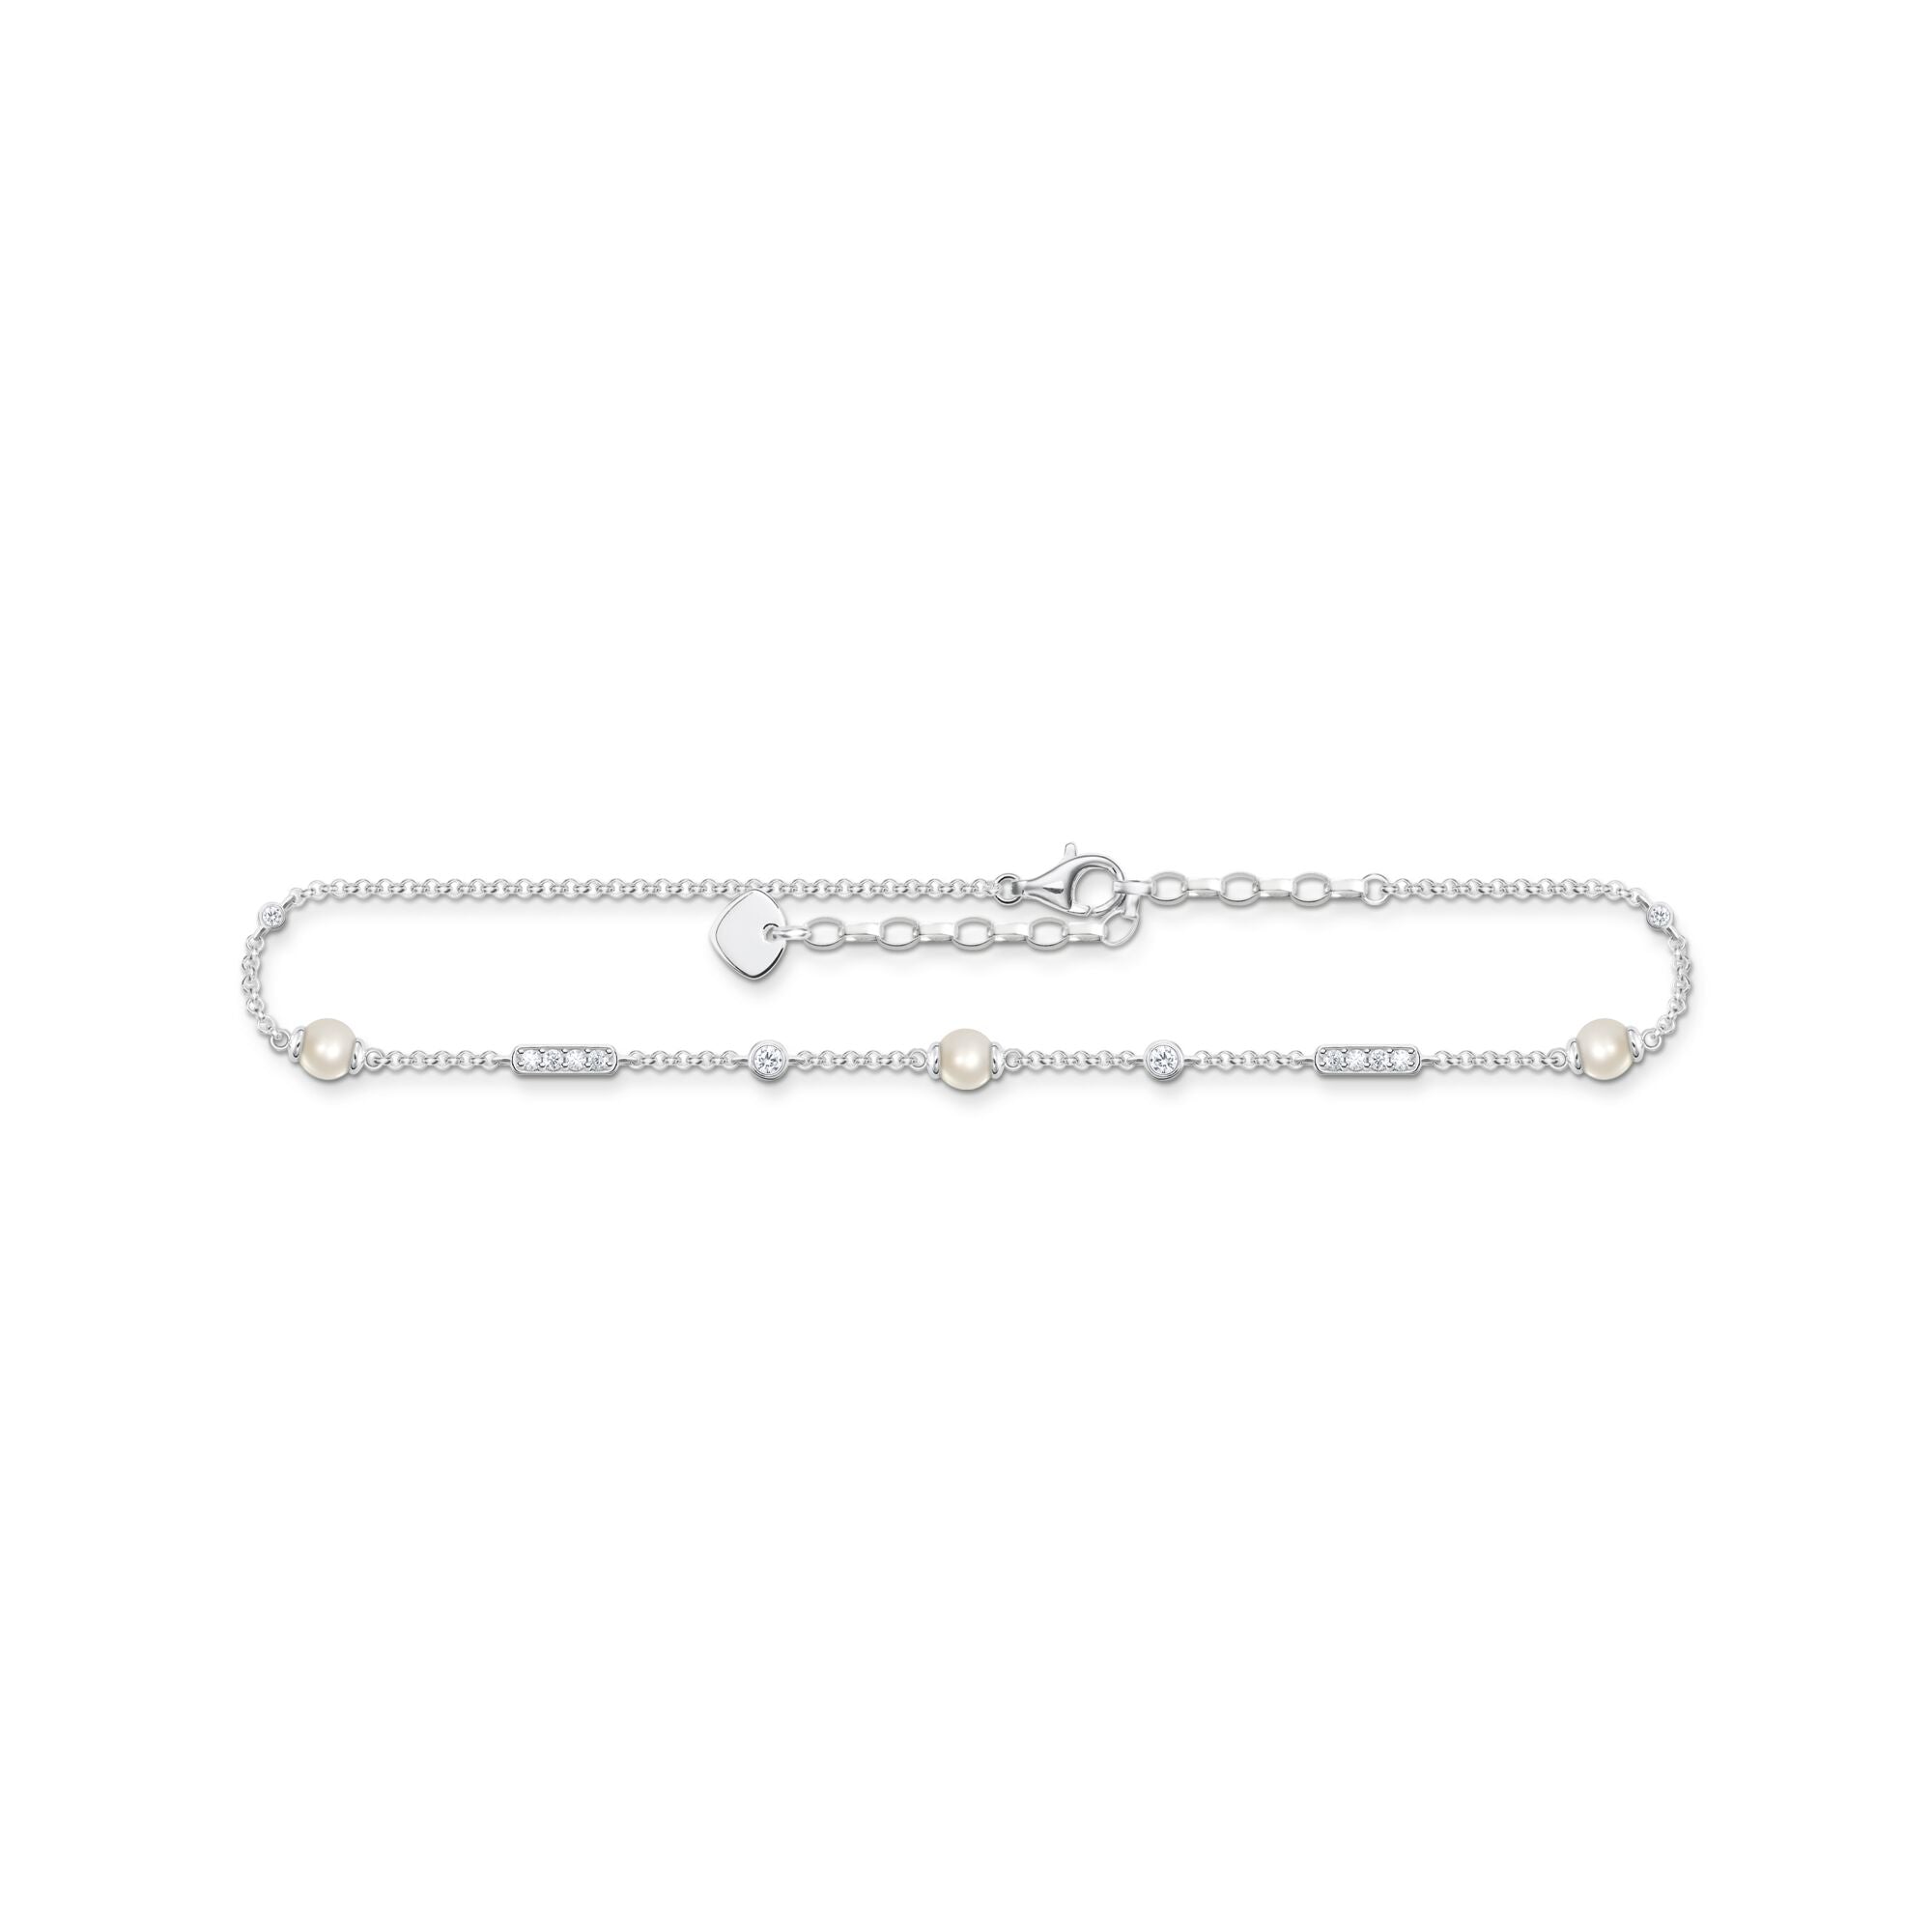 Thomas Sabo Pearl and Stone Anklet